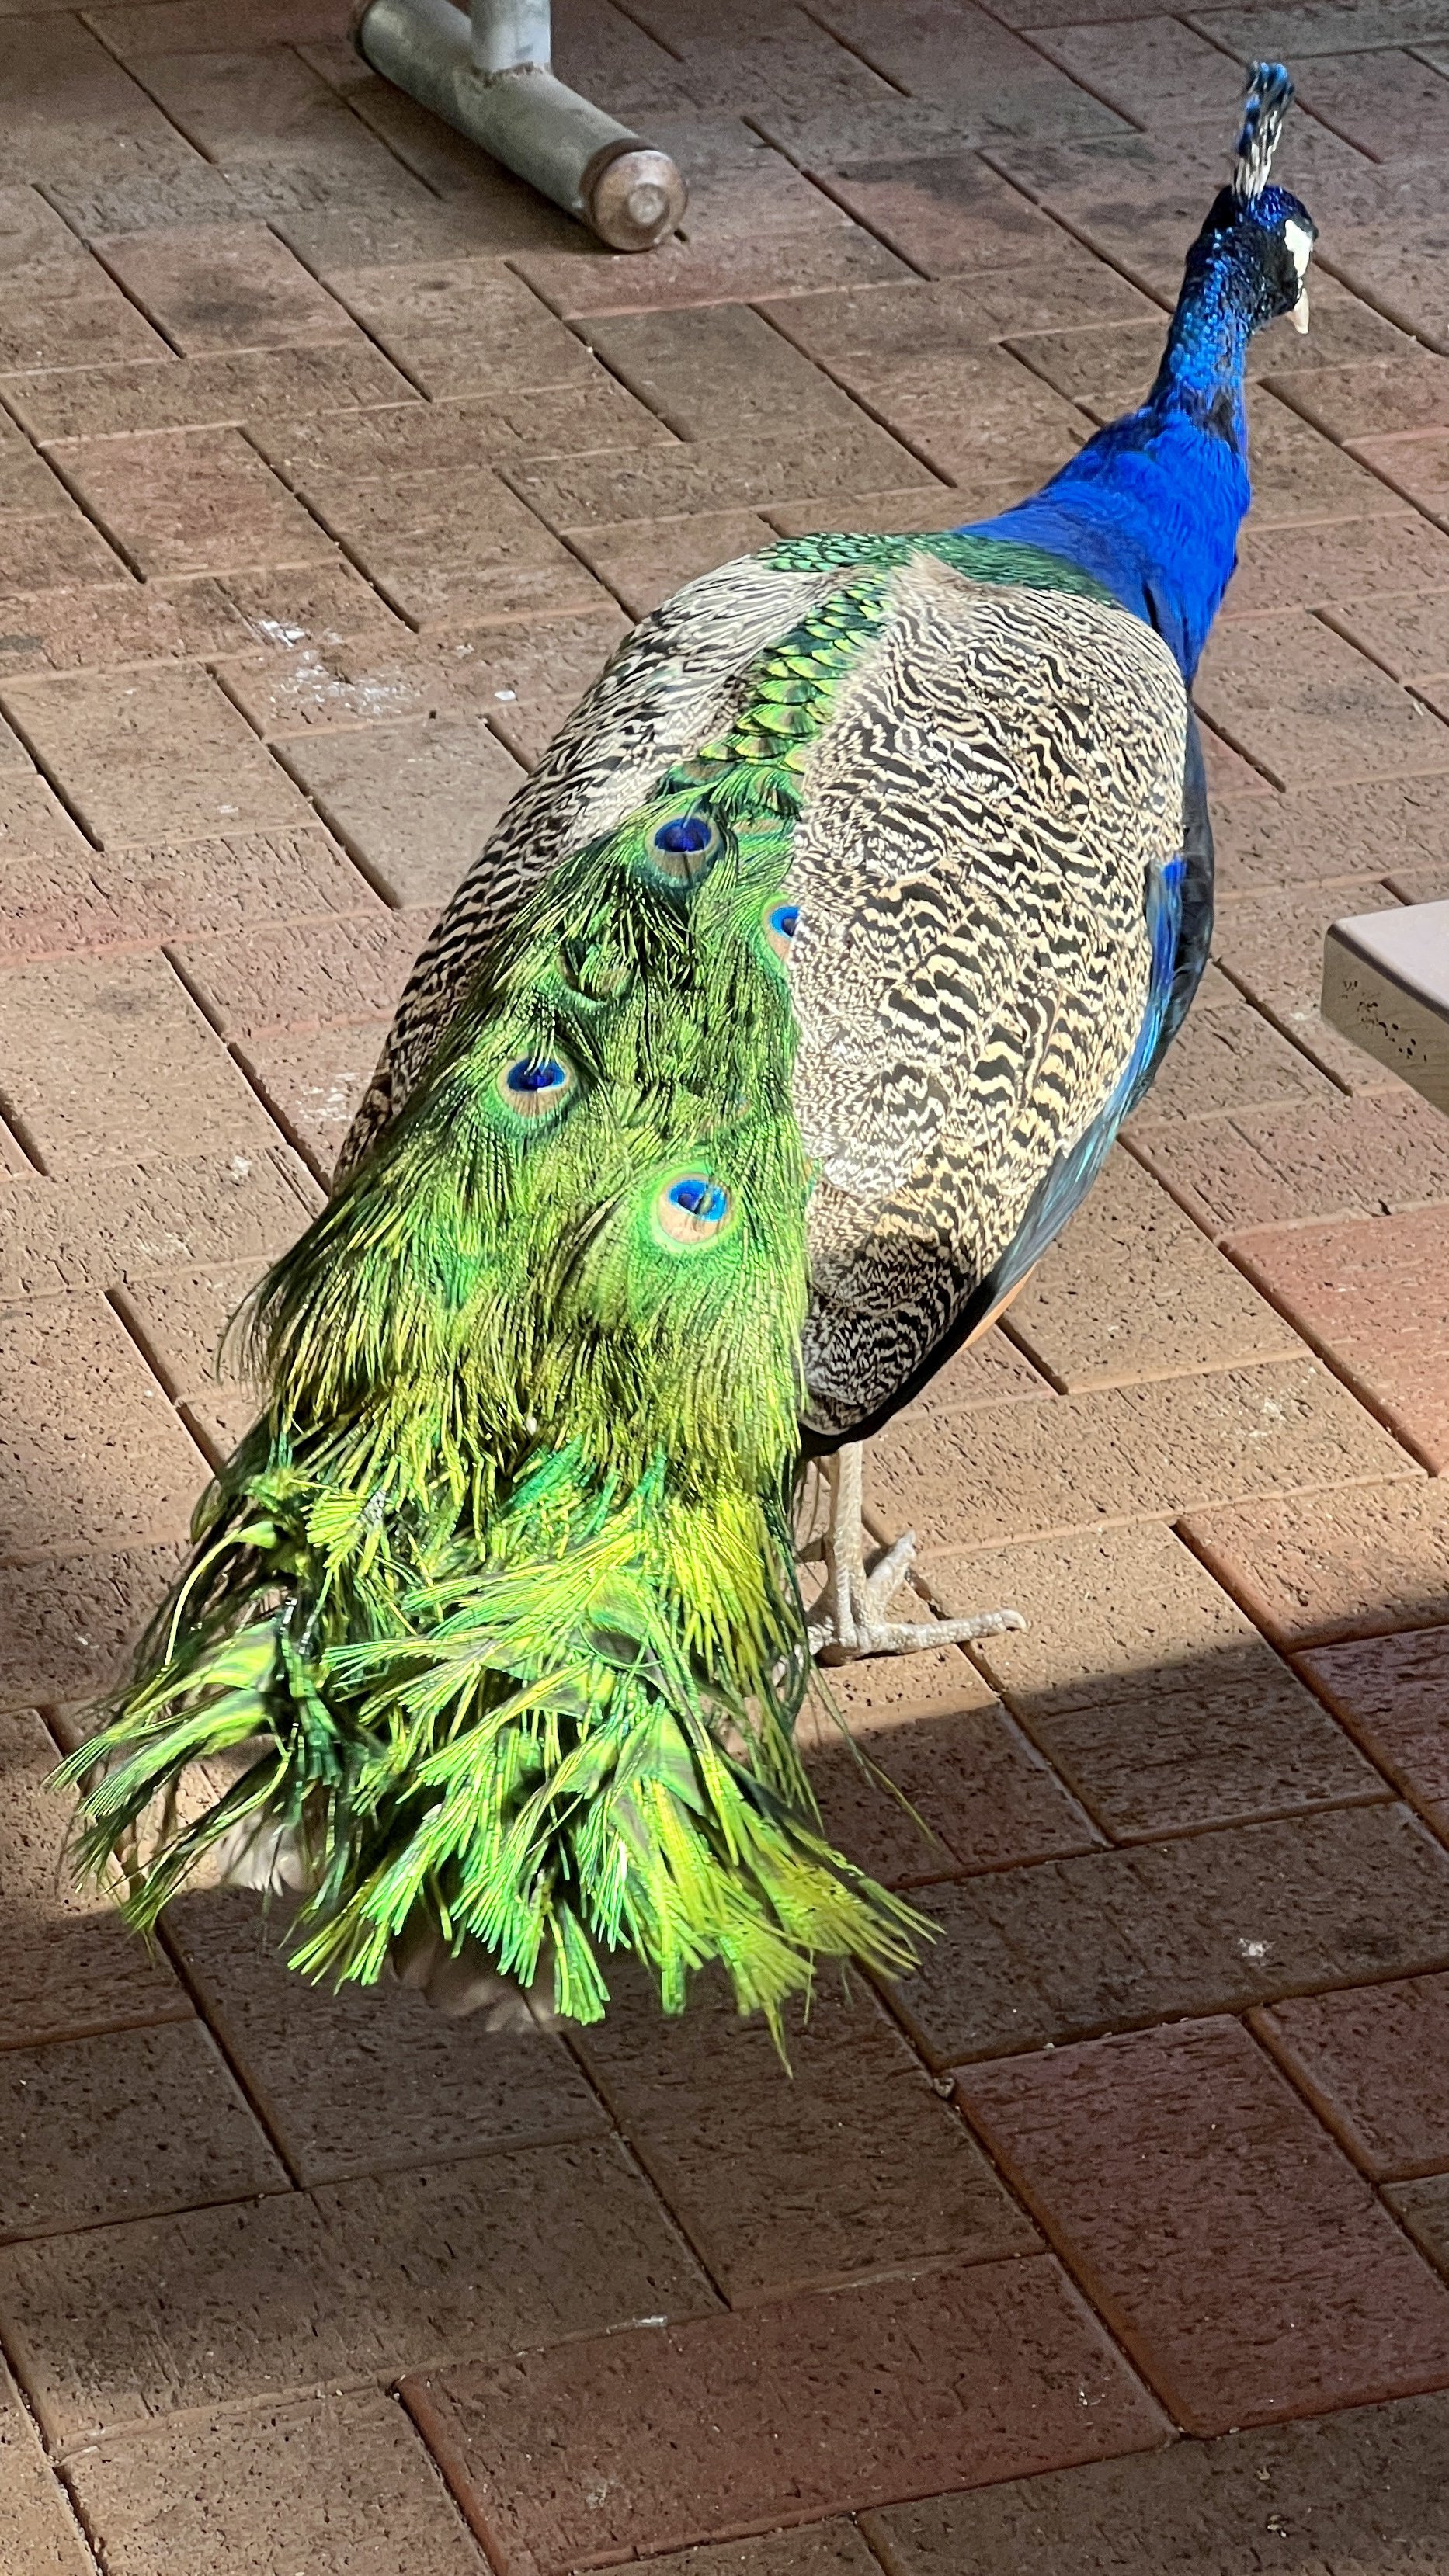 Just a peacock wandering around